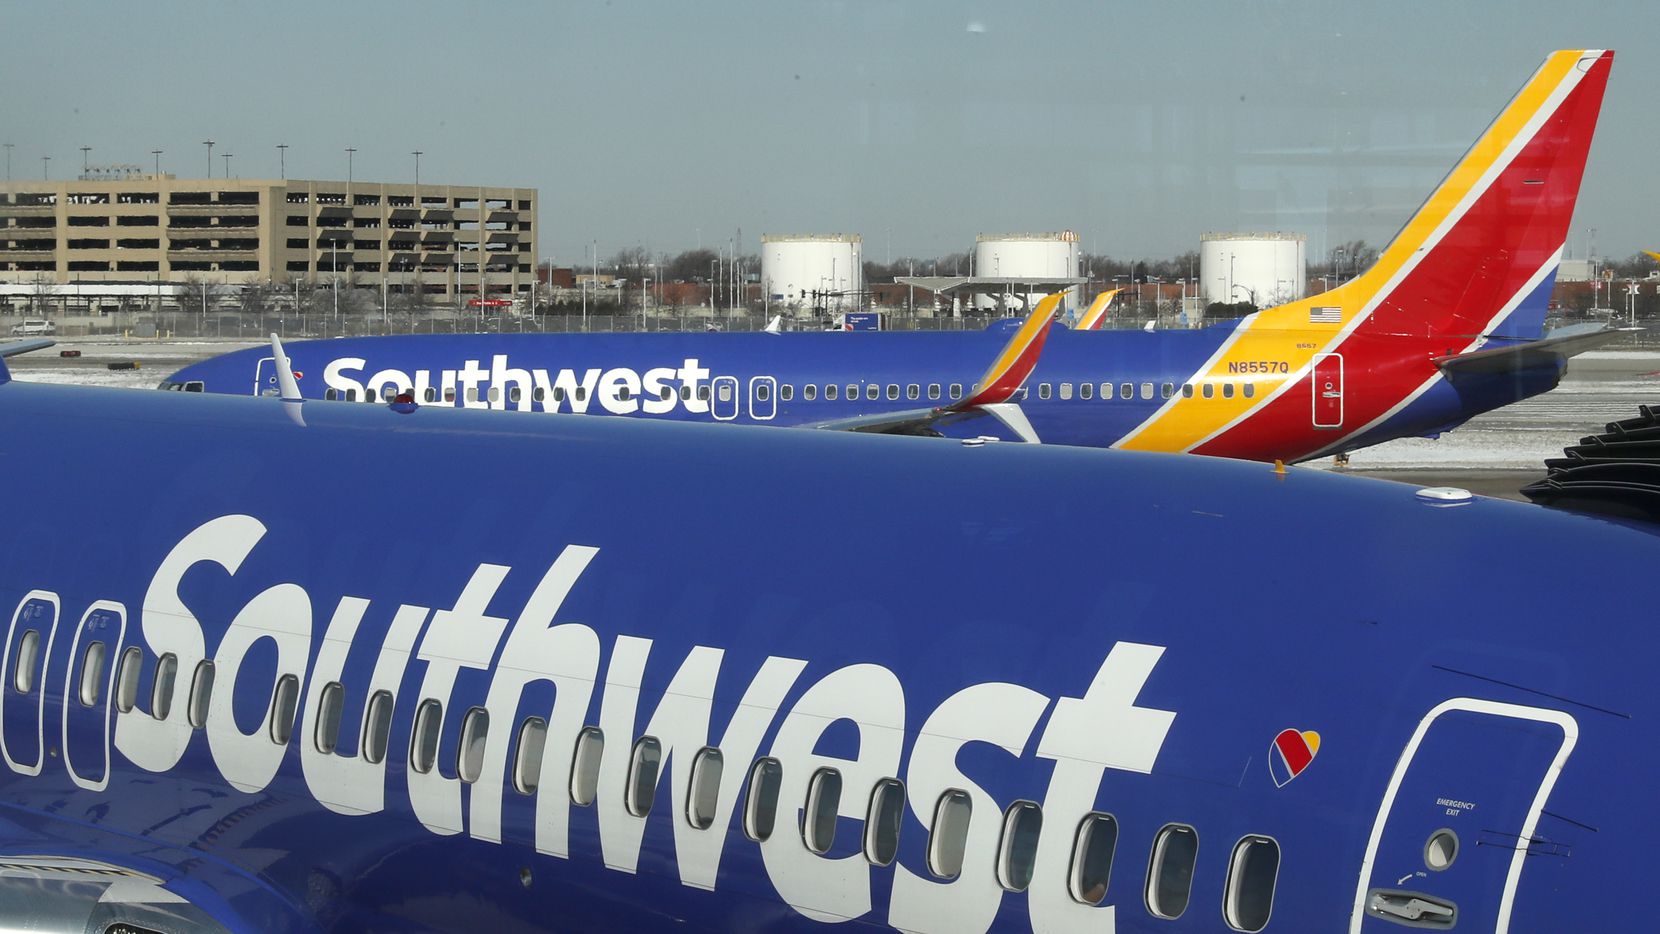 A Southwest Airlines flight, background, taxis to the runway past a loading flight at a gate...